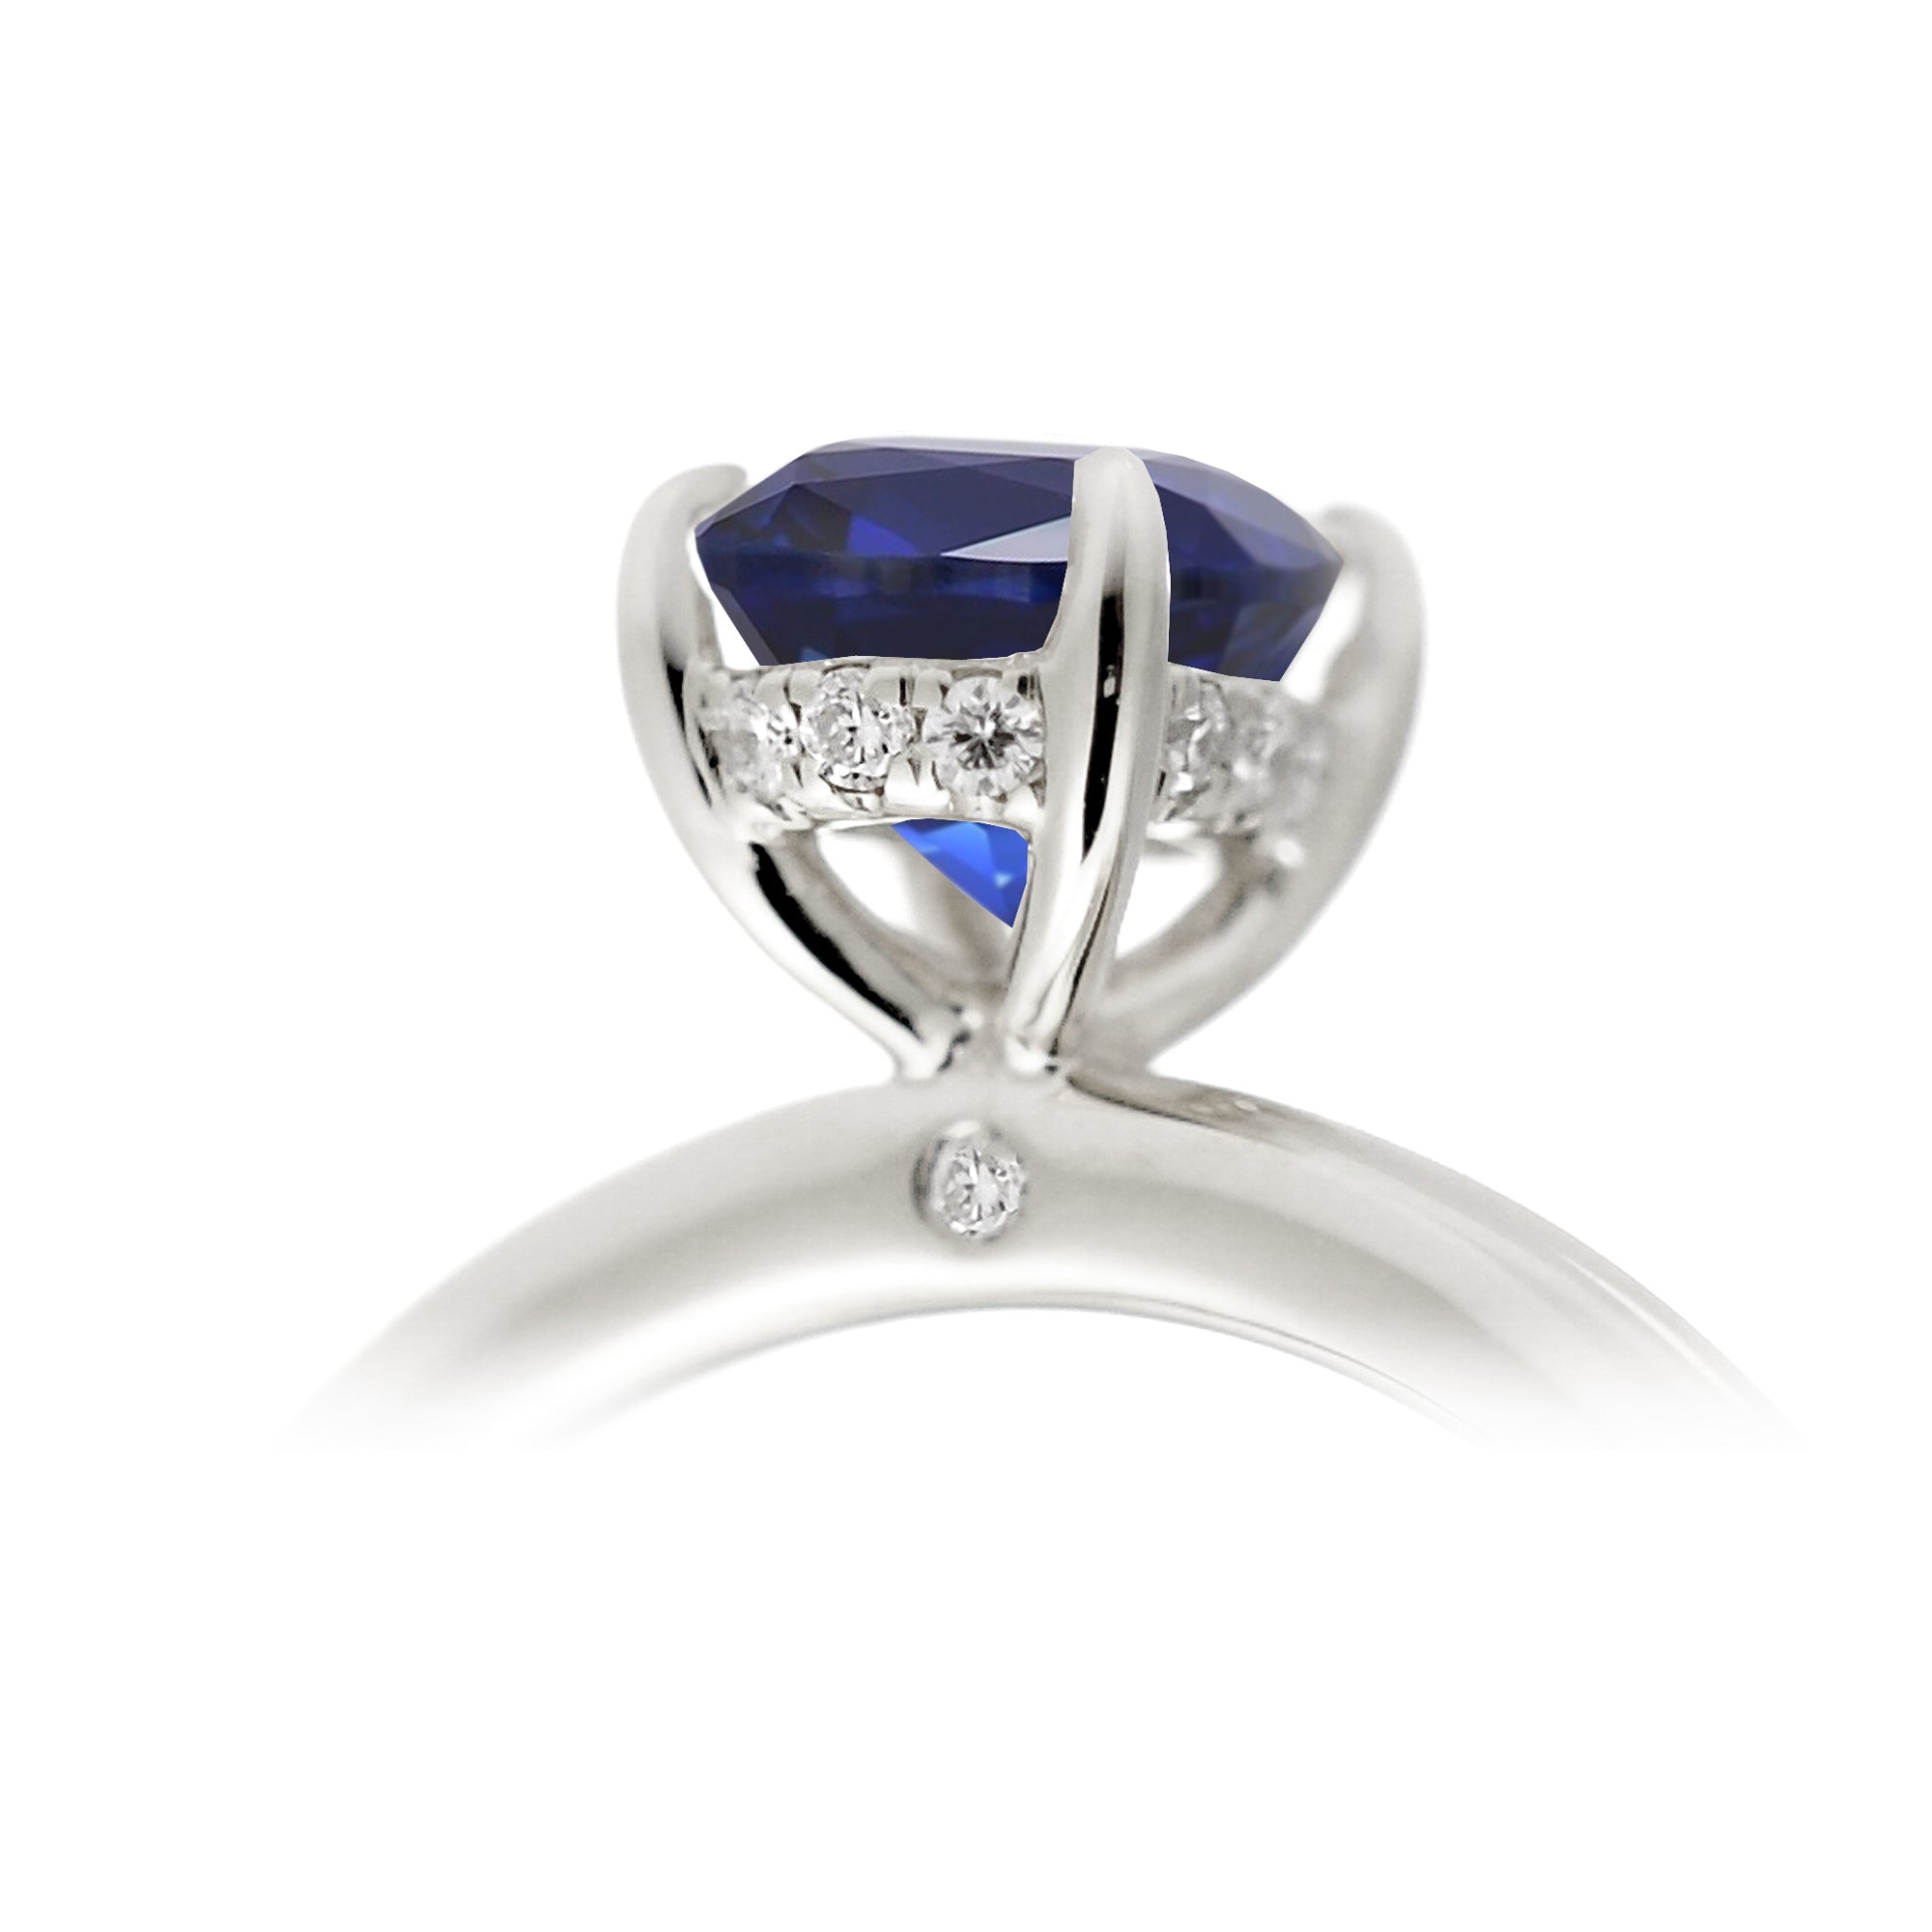 Oval cut blue sapphire engagement ring with a diamond hidden halo and solid band white gold